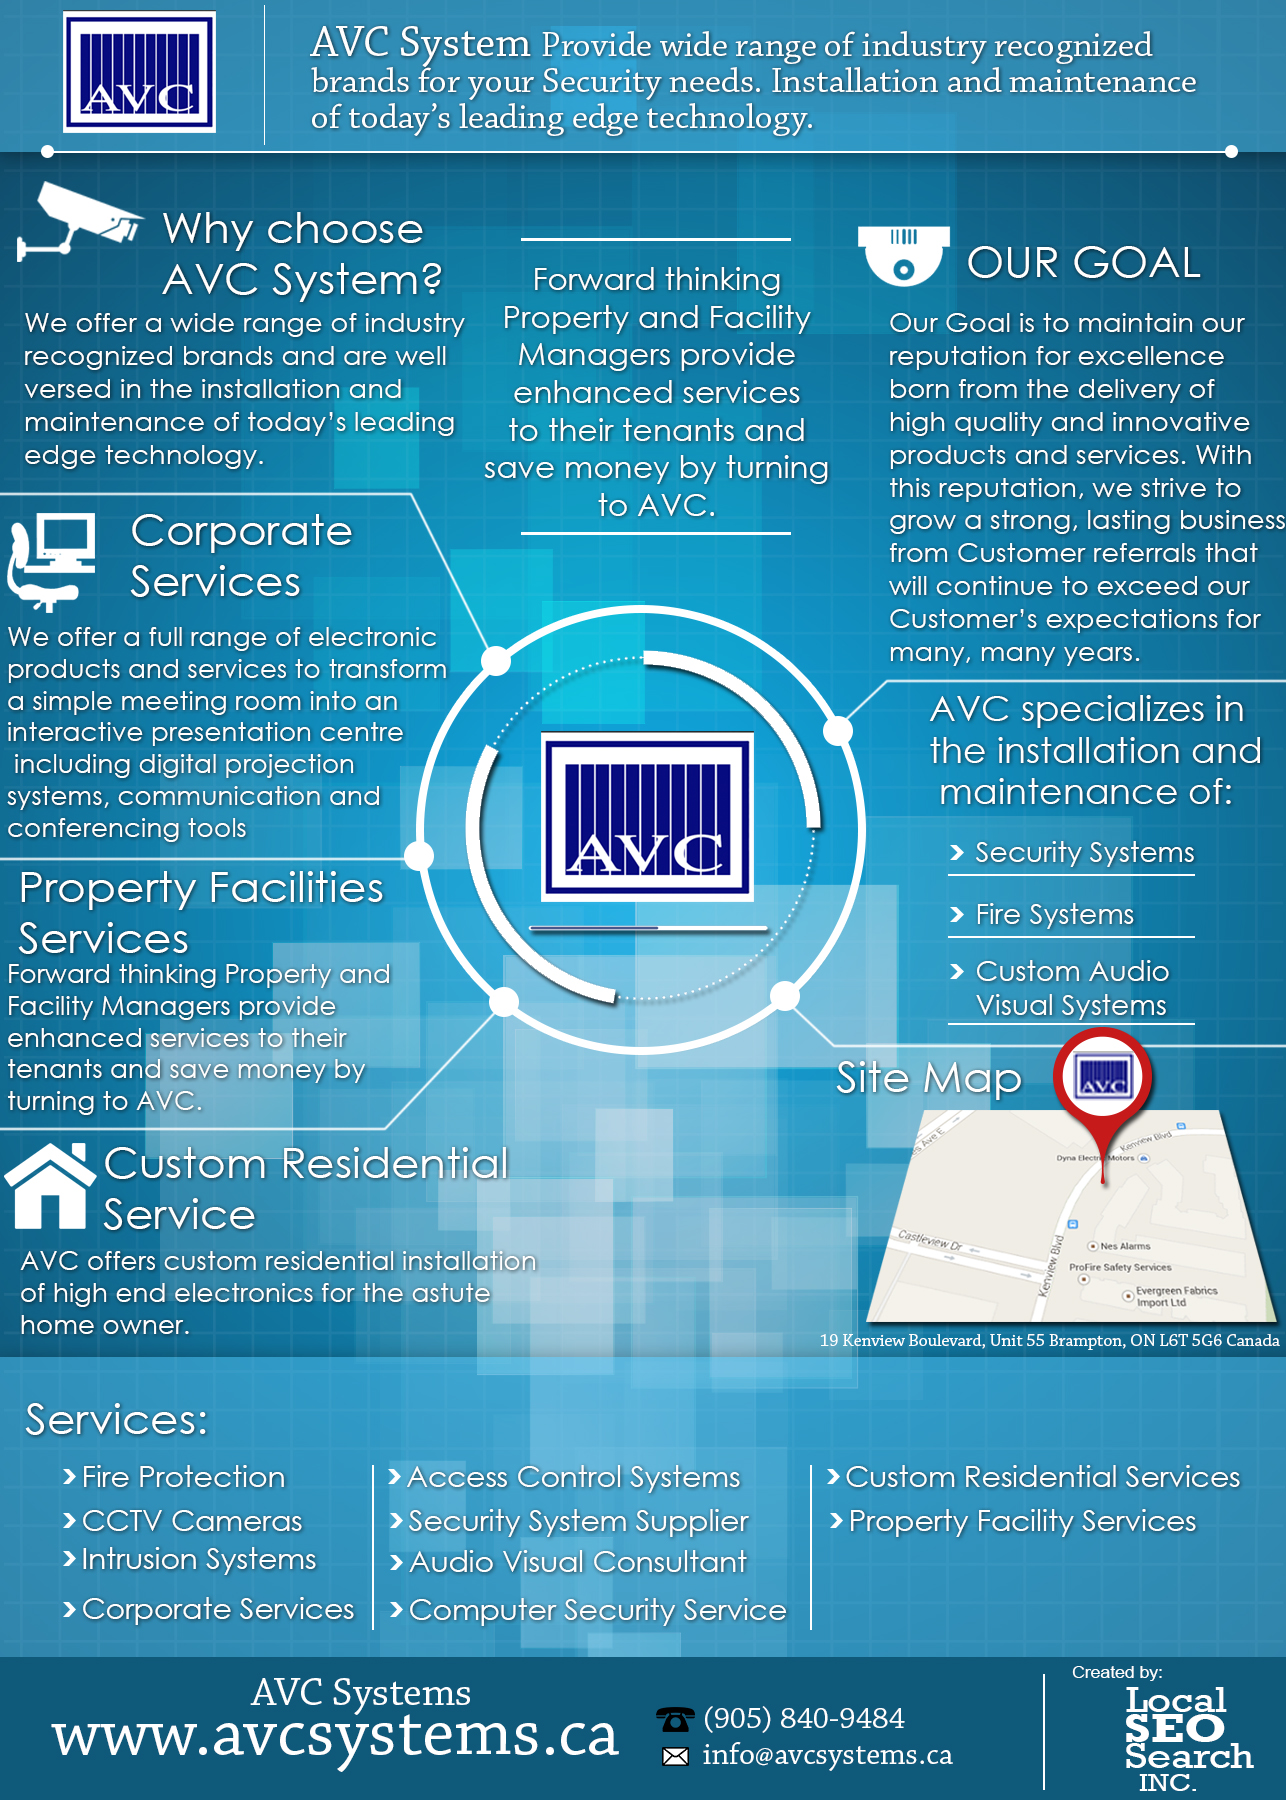 AVC Systems: More than 20 years in Business Security Systems Serving Toronto and GTA Area